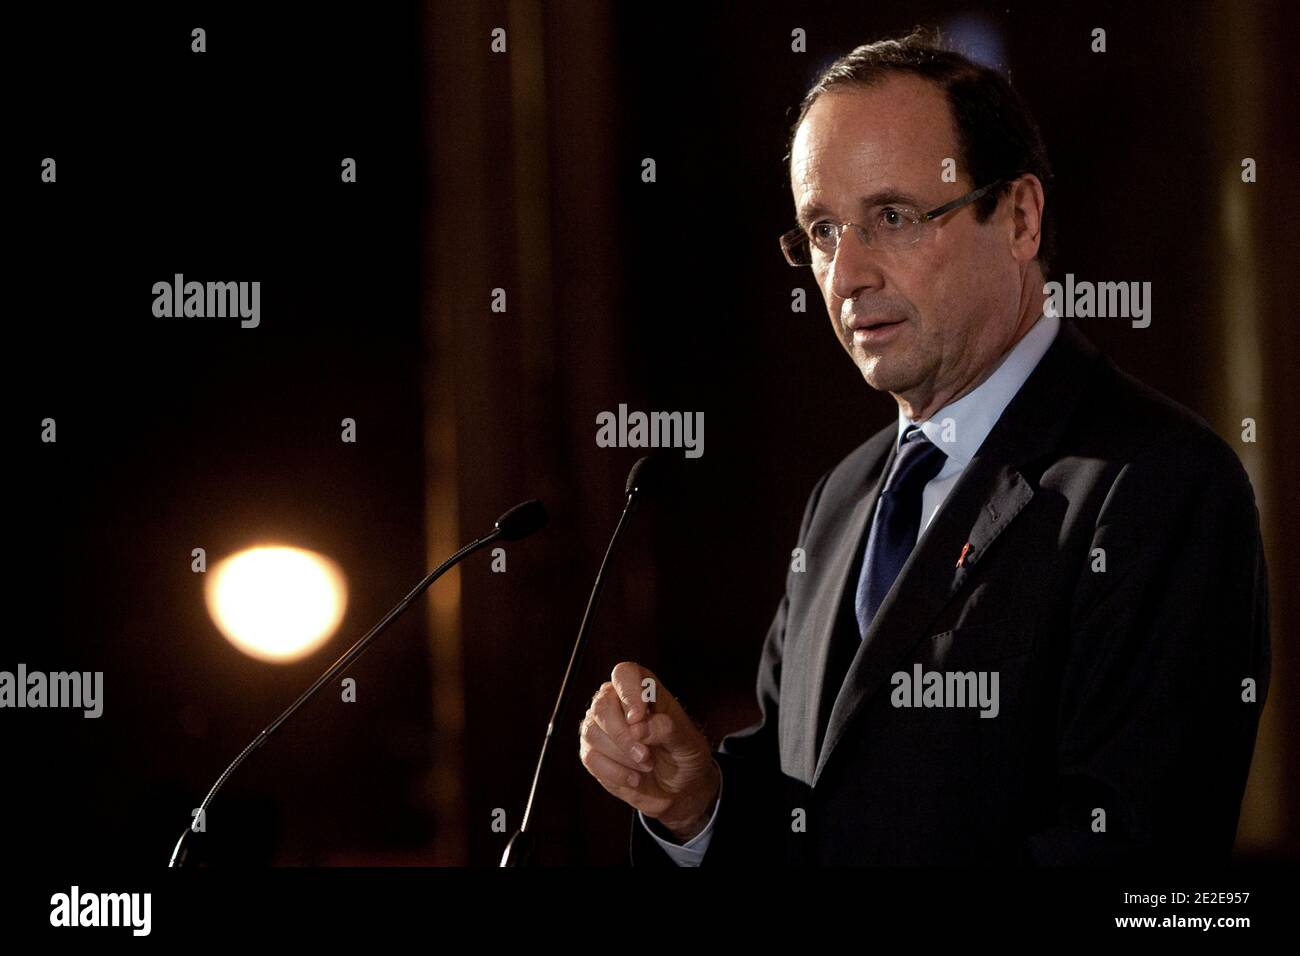 https://c8.alamy.com/comp/2E2E957/french-opposition-socialist-party-ps-candidate-for-the-2012-french-presidential-election-francois-hollande-delivers-a-speech-during-a-meeting-focused-on-aids-at-the-city-hall-in-paris-france-on-november-29-2011-photo-by-stephane-lemoutonabacapresscom-2E2E957.jpg